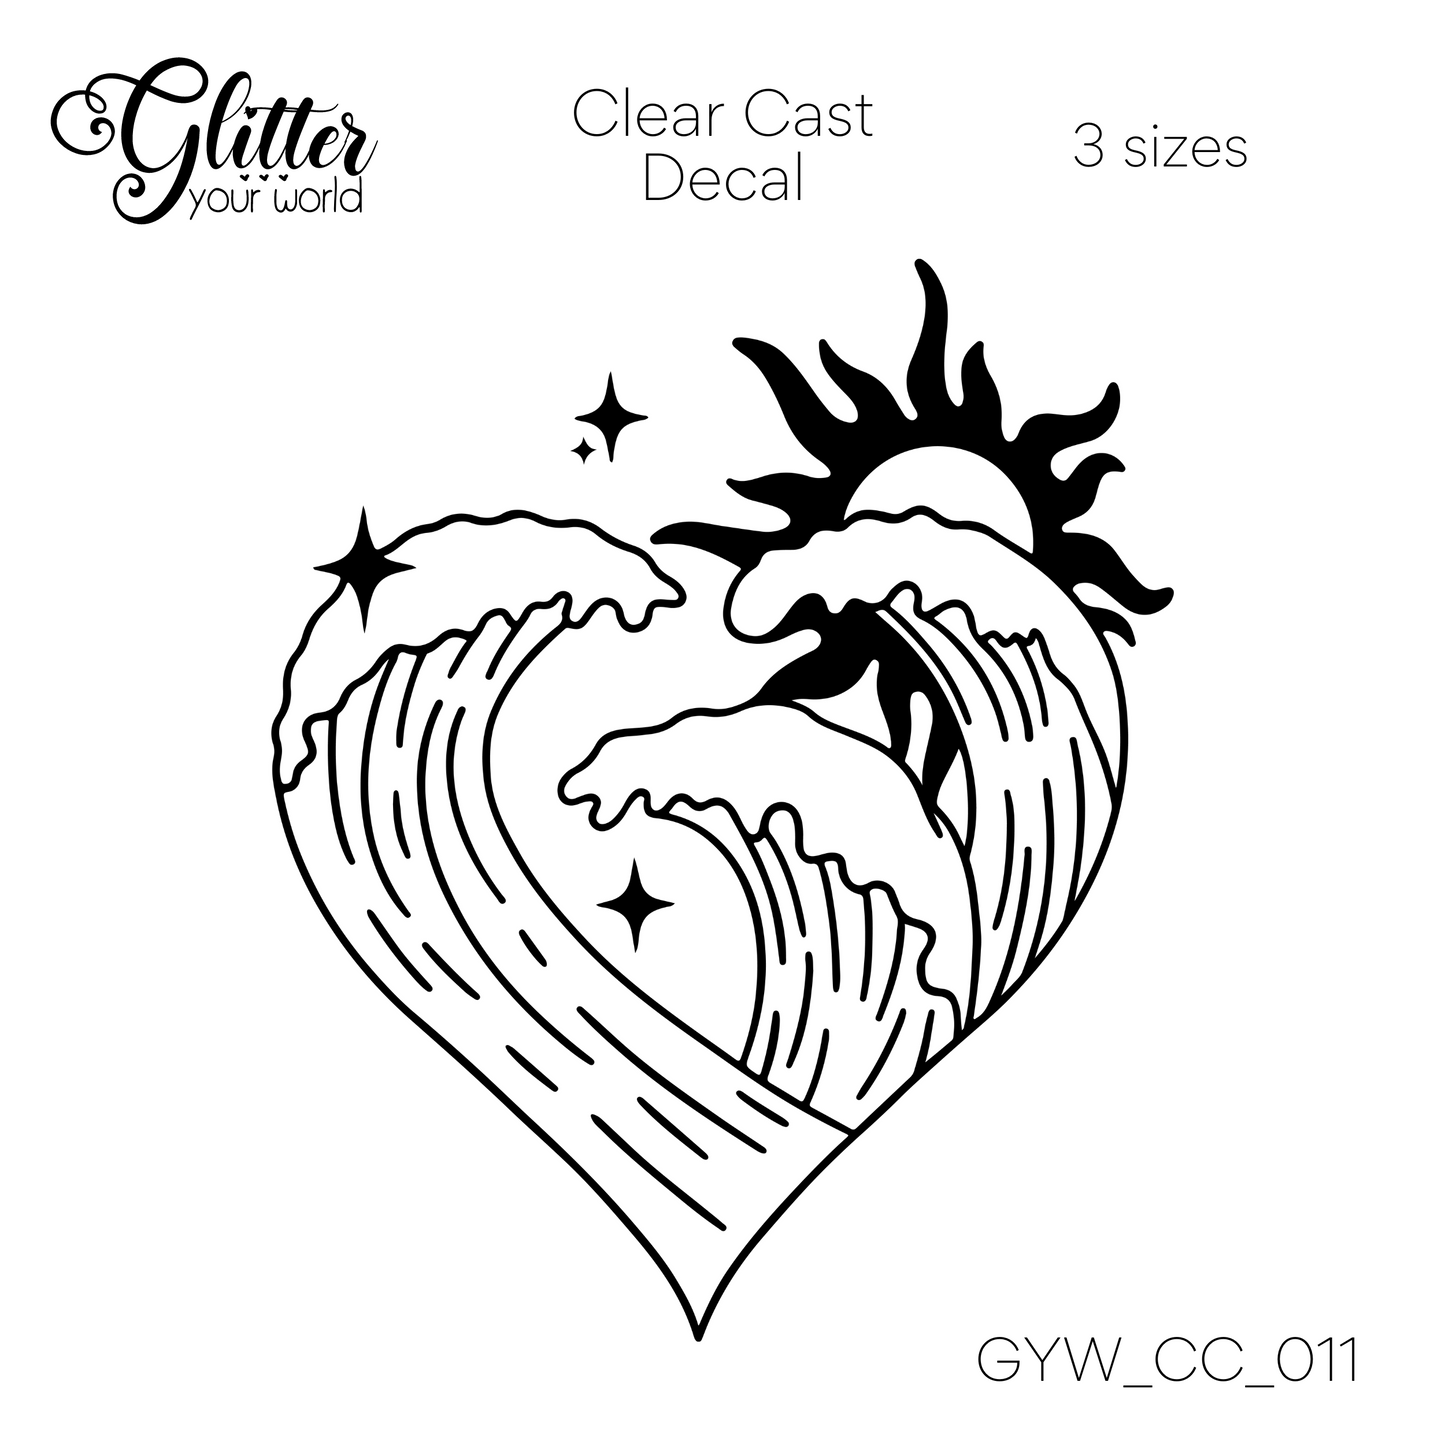 Wave Heart CC_011 Clear Cast Decal